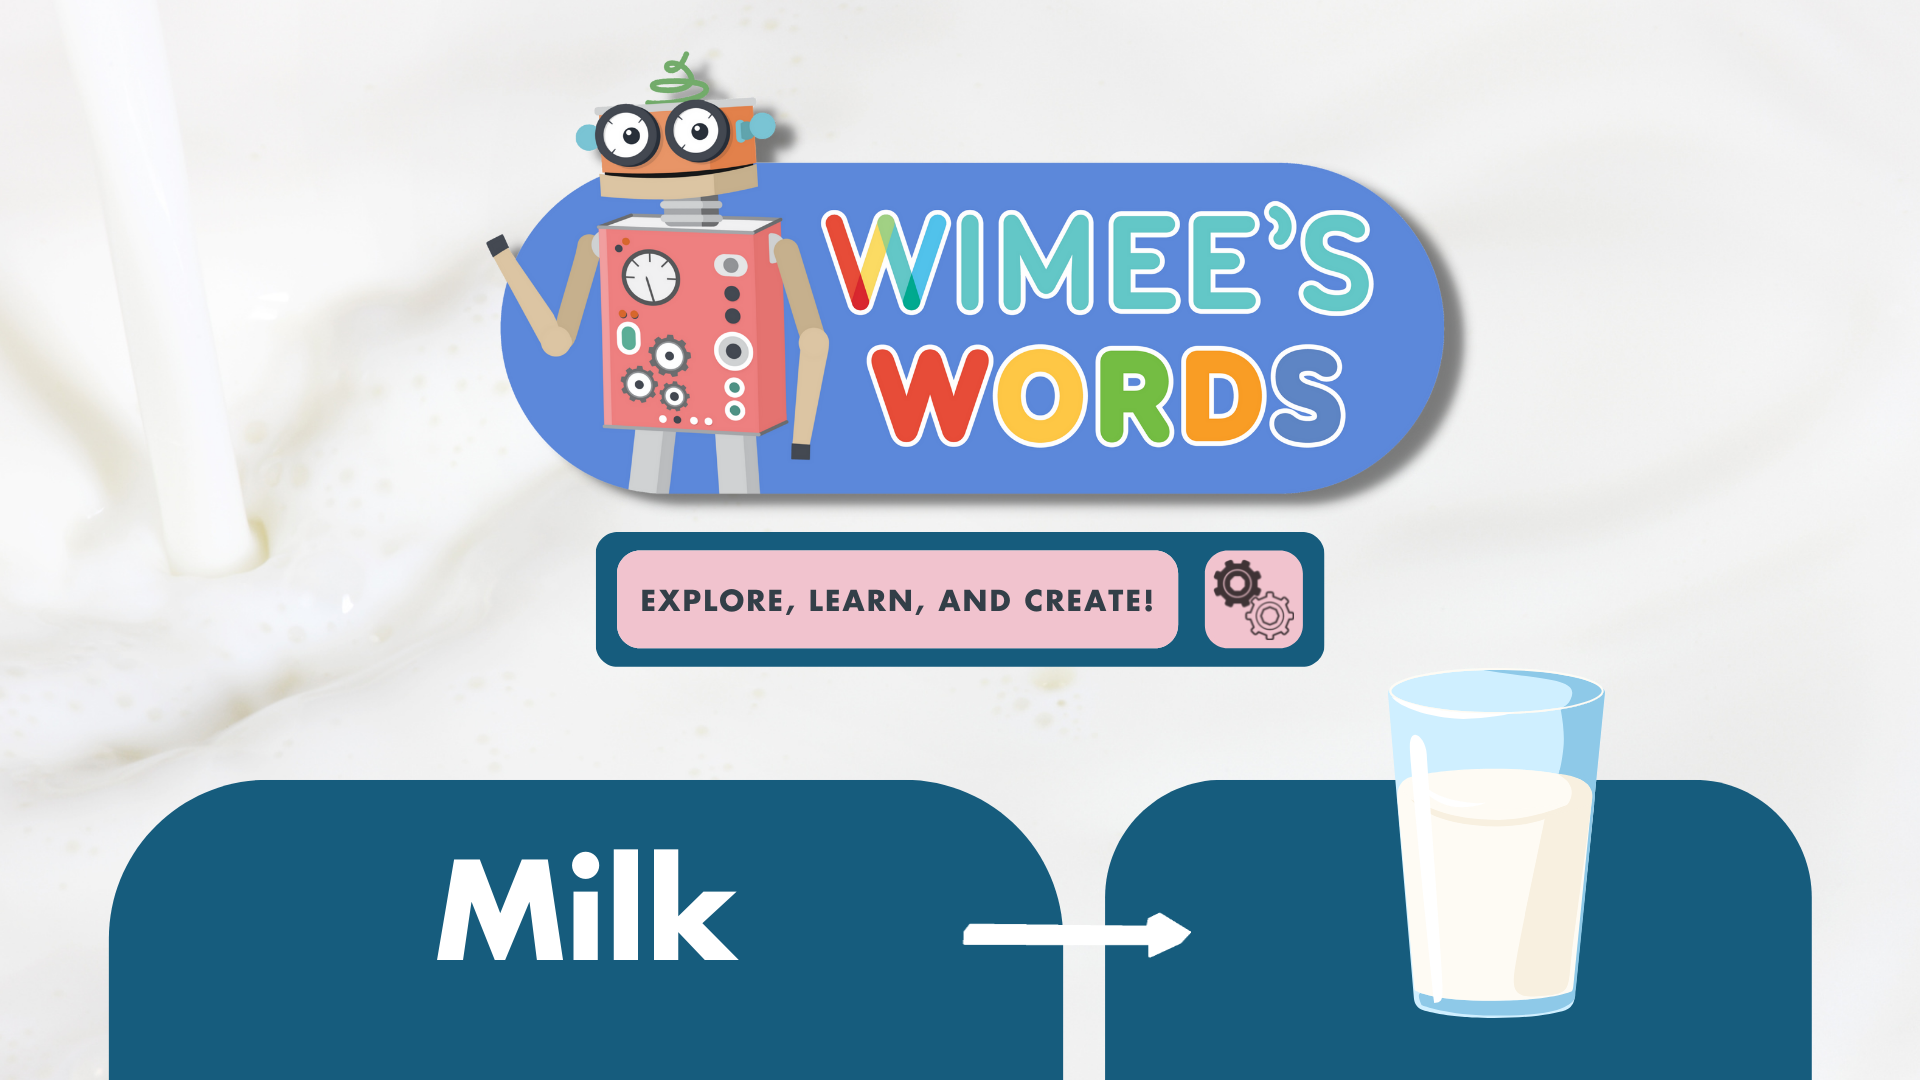 A cluse-up photo of milk pouring. The Wimee's Words logo, a graphic of a glass of milk, and the title "Milk" are over the image.